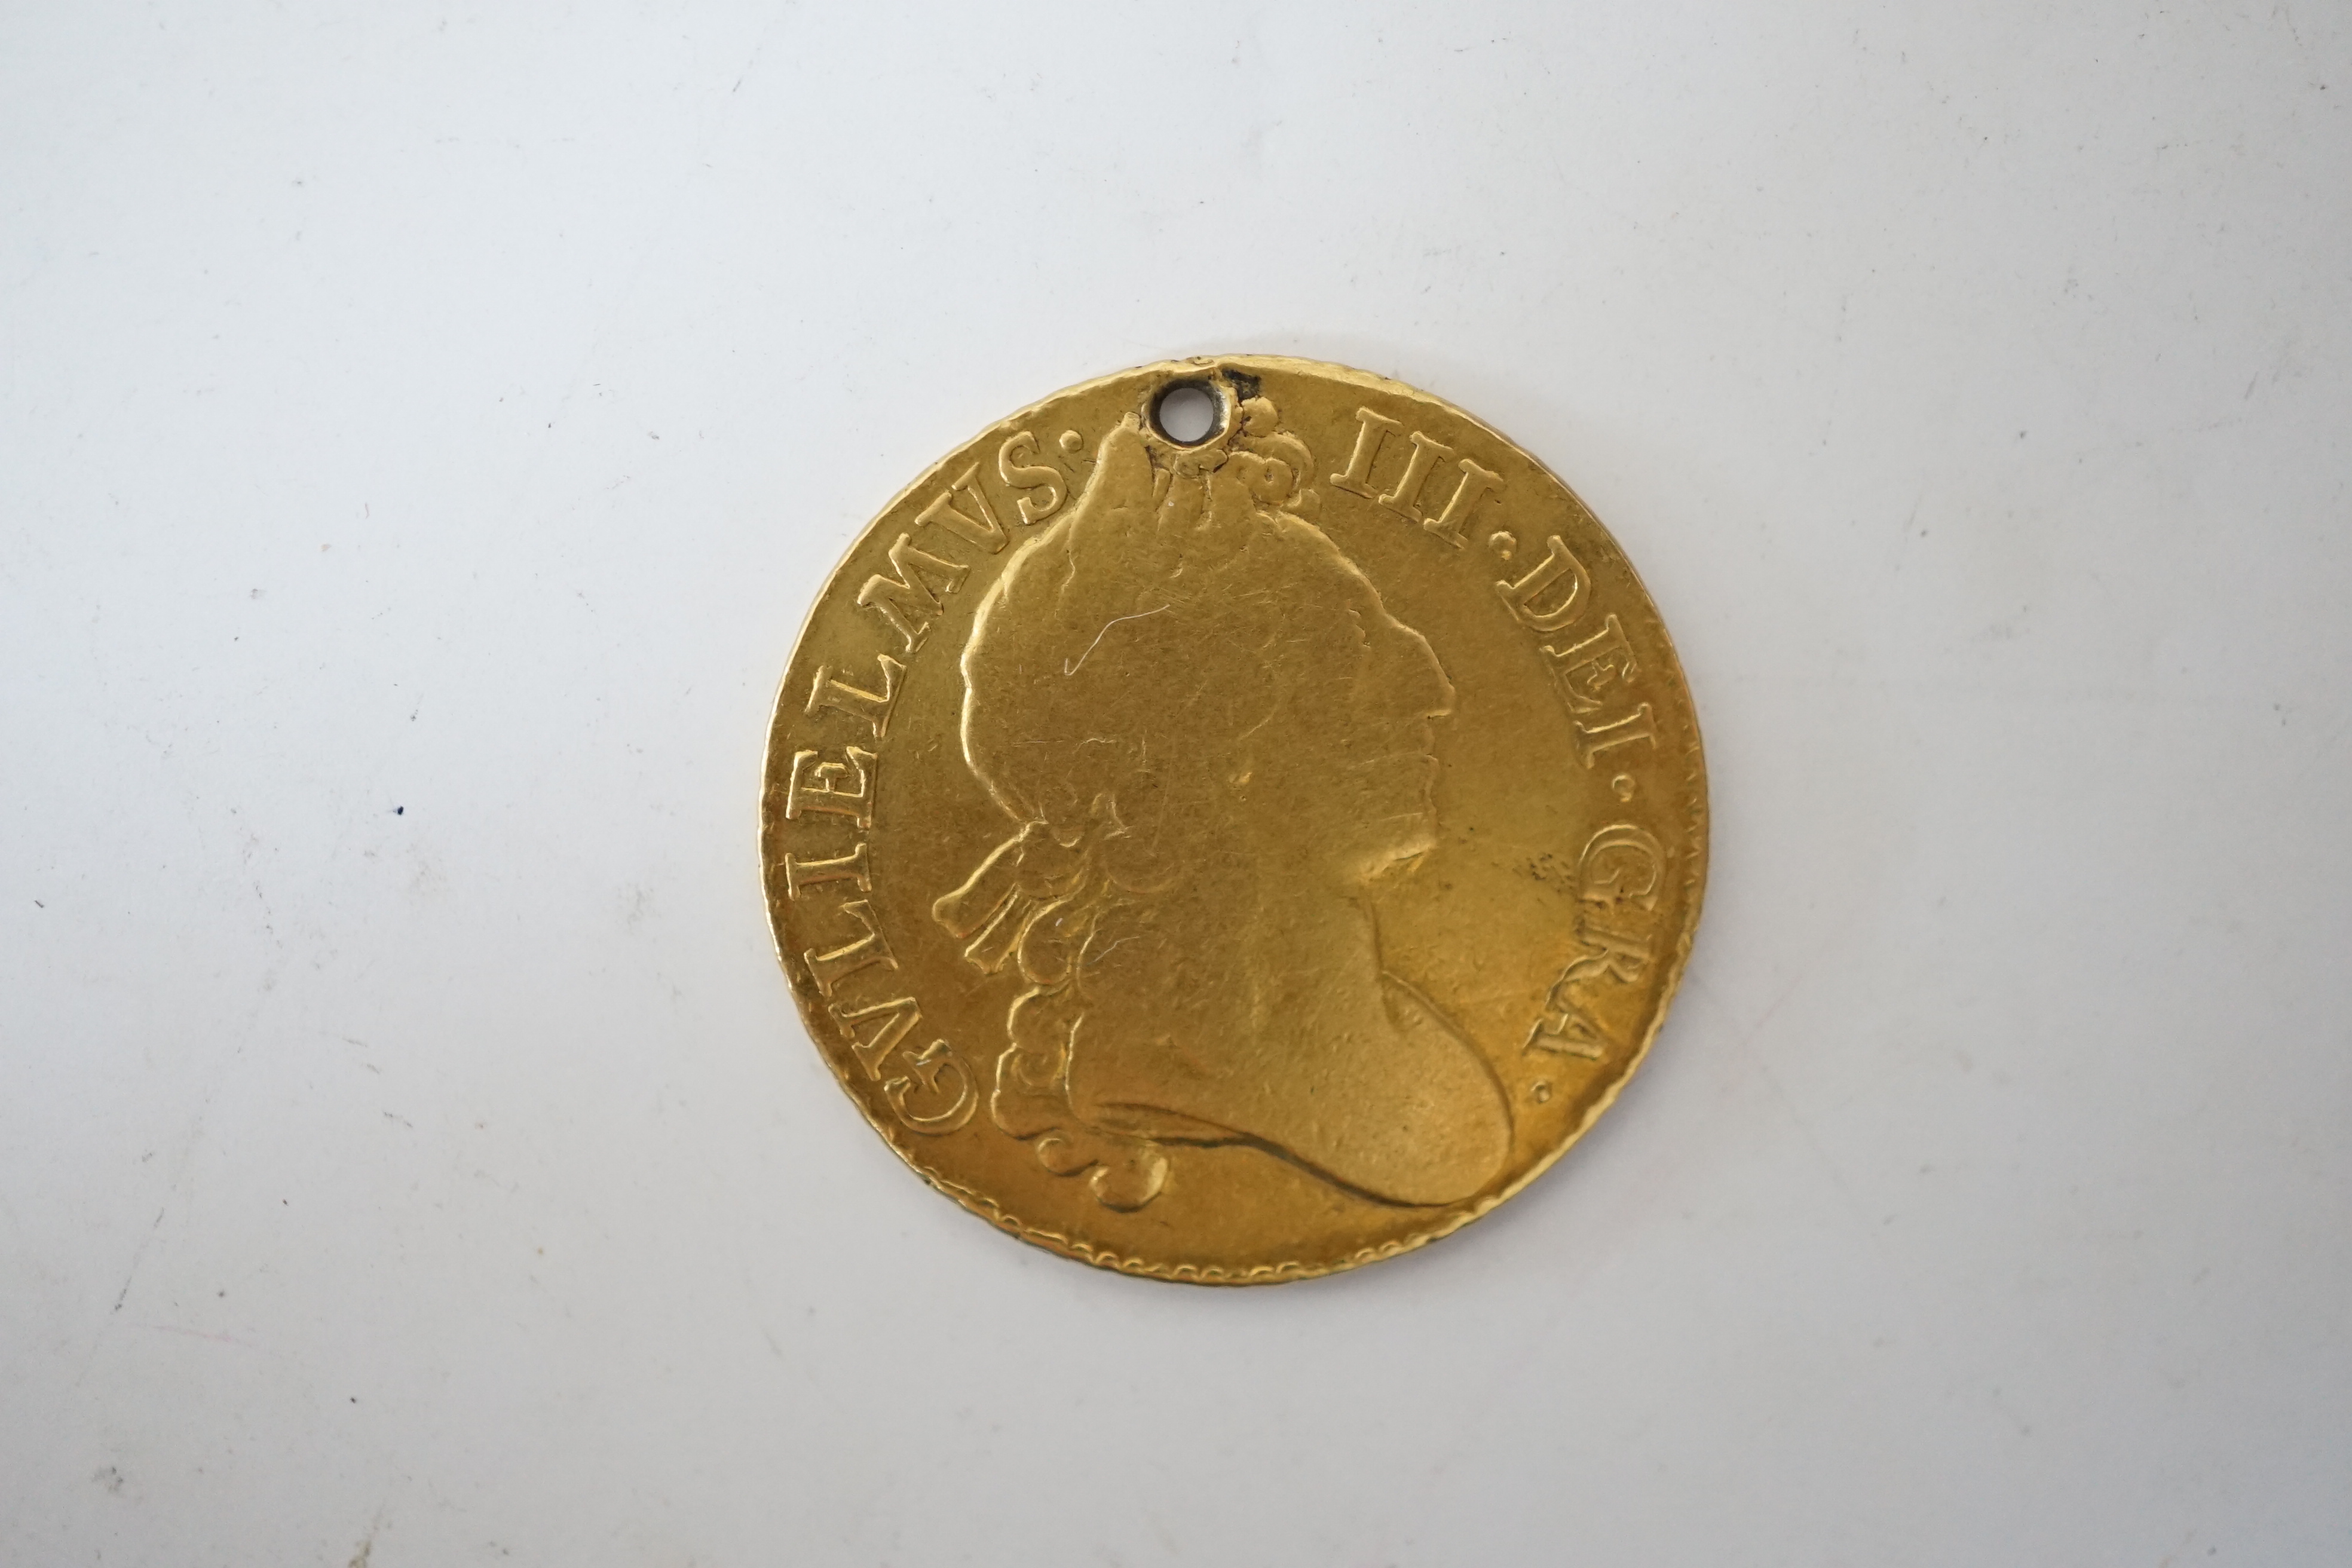 British gold coins, William III guinea, 1698, holed otherwise VG/F, 7.58g